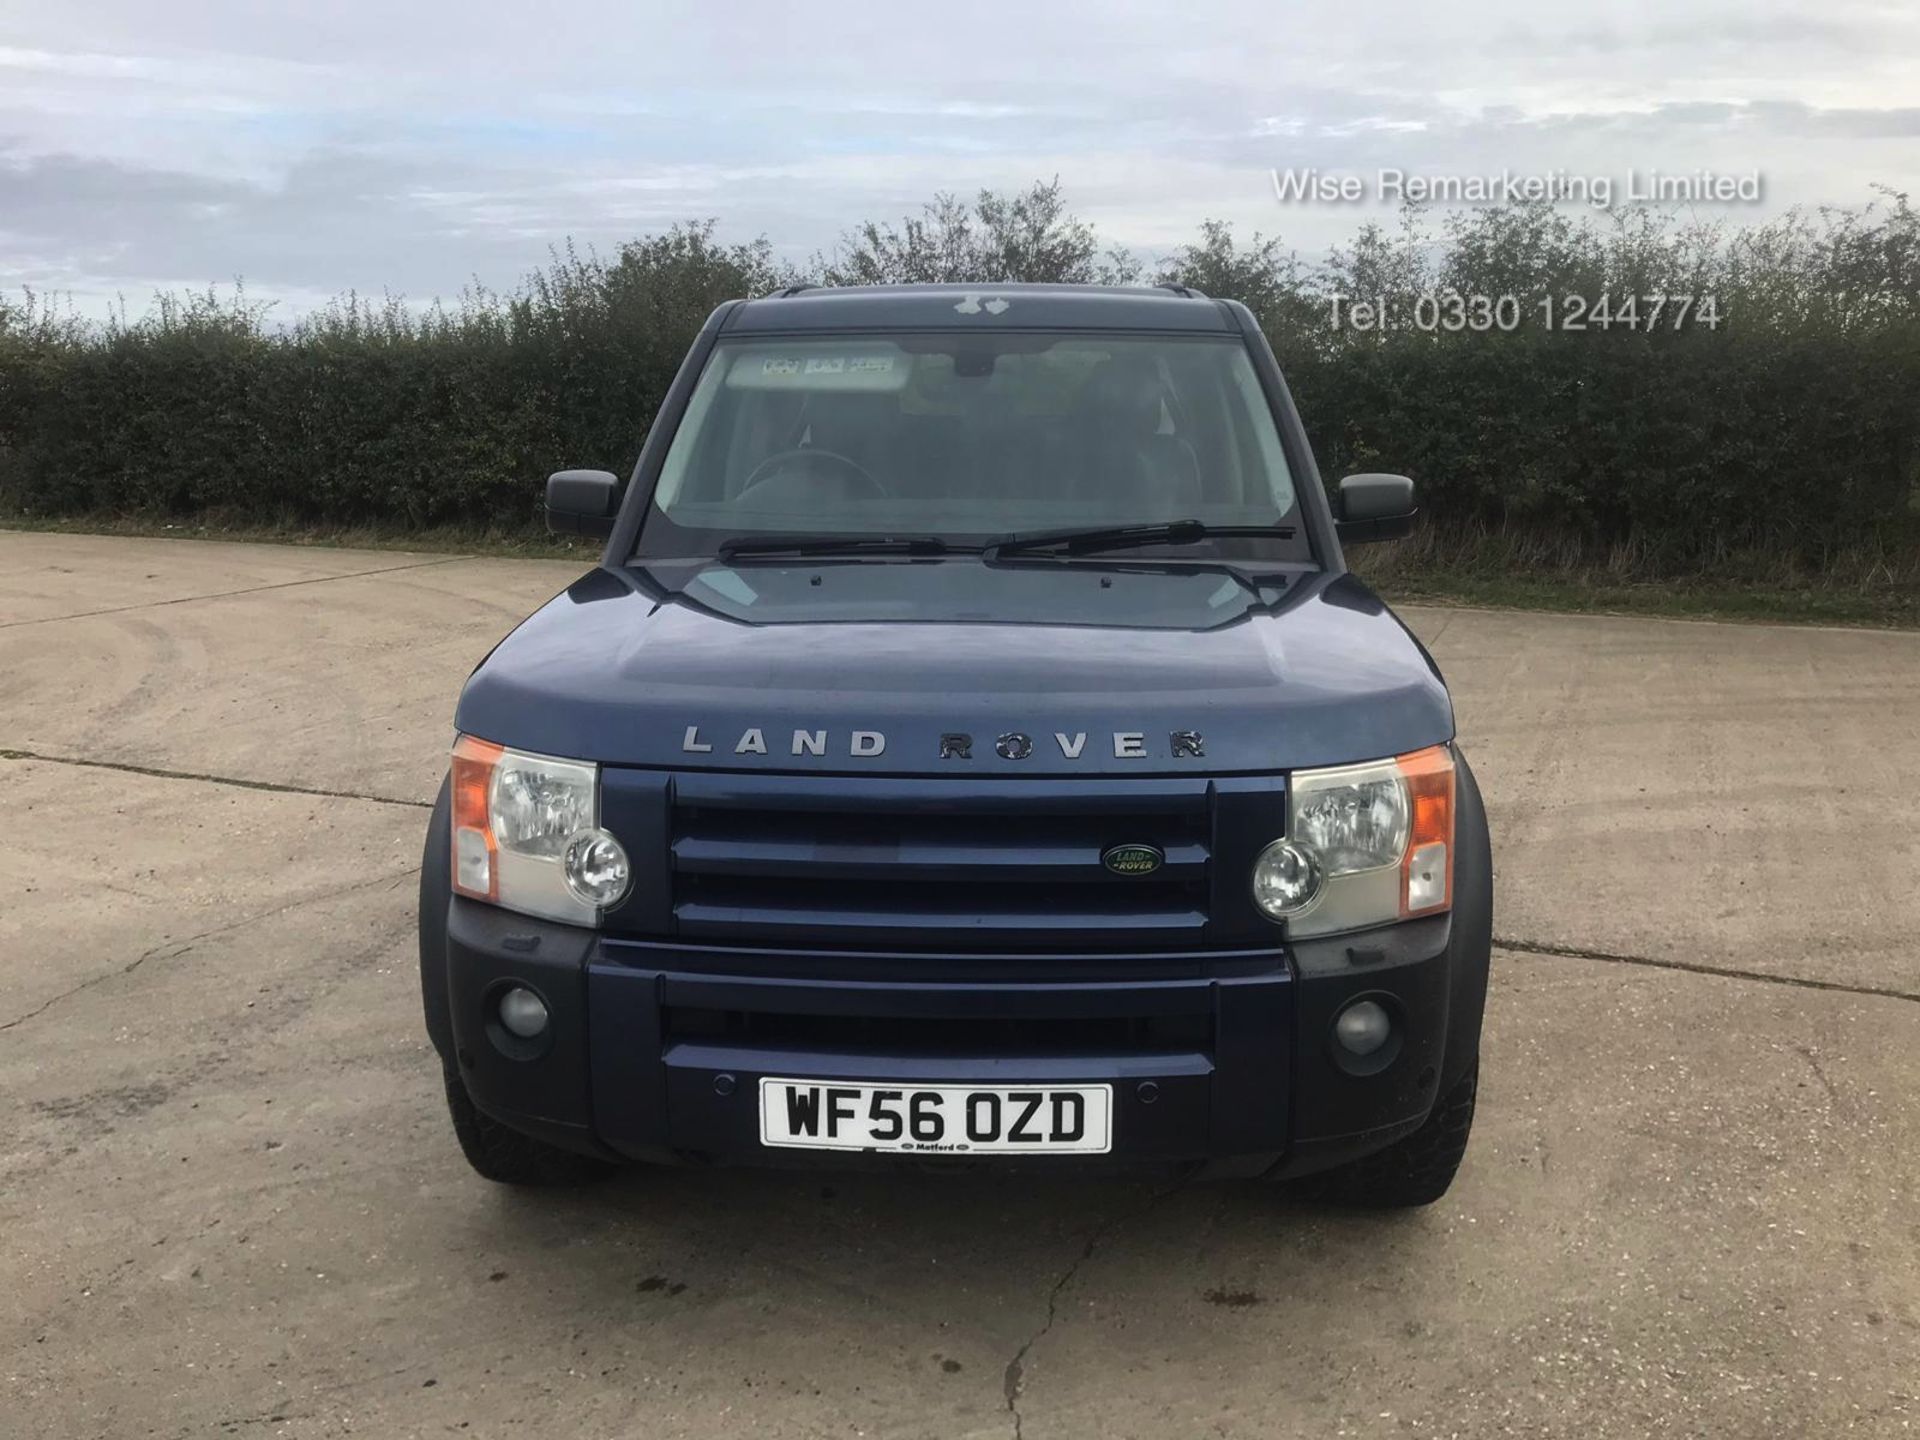 Land Rover Discovery 2.7 Td V6 Special Equipment - Auto - 2007 Model - 4x4 - Image 2 of 20